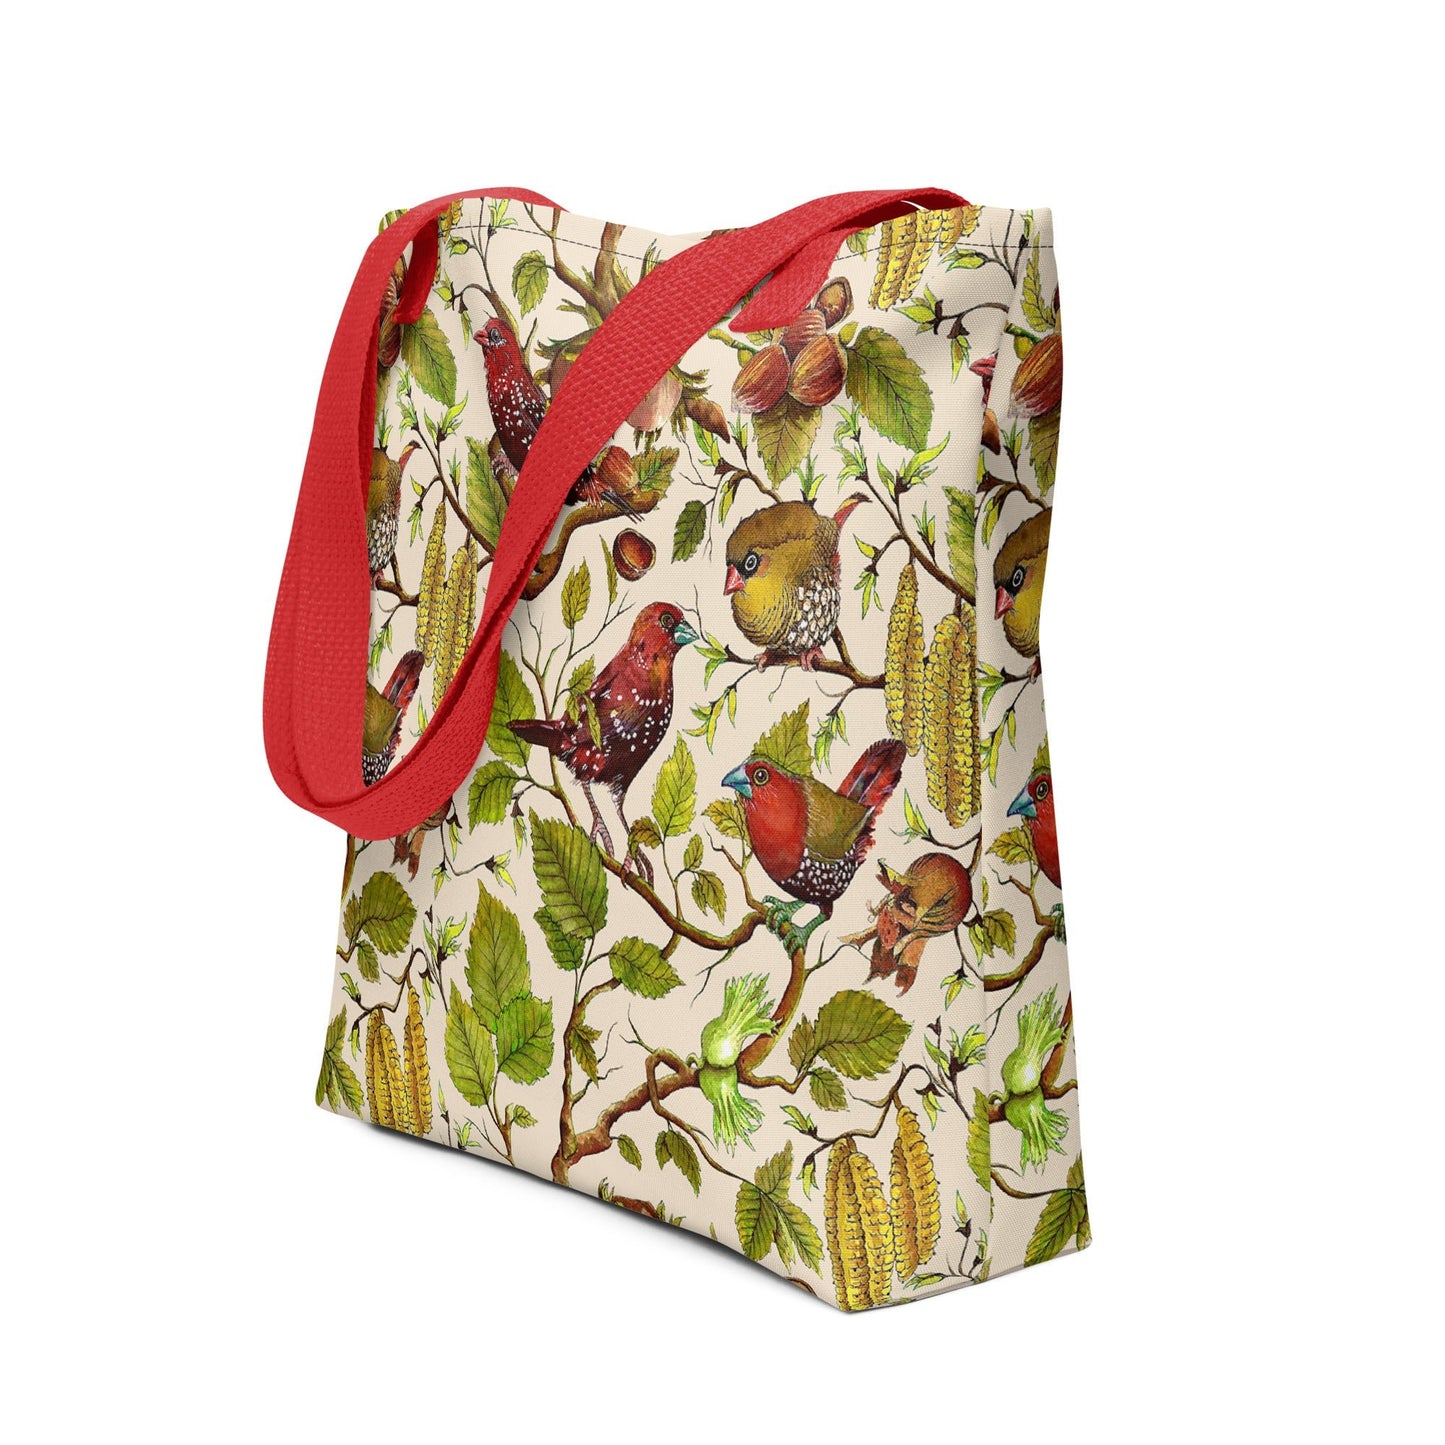 CHESTNUT Shopping Tote Bag - Bonotee